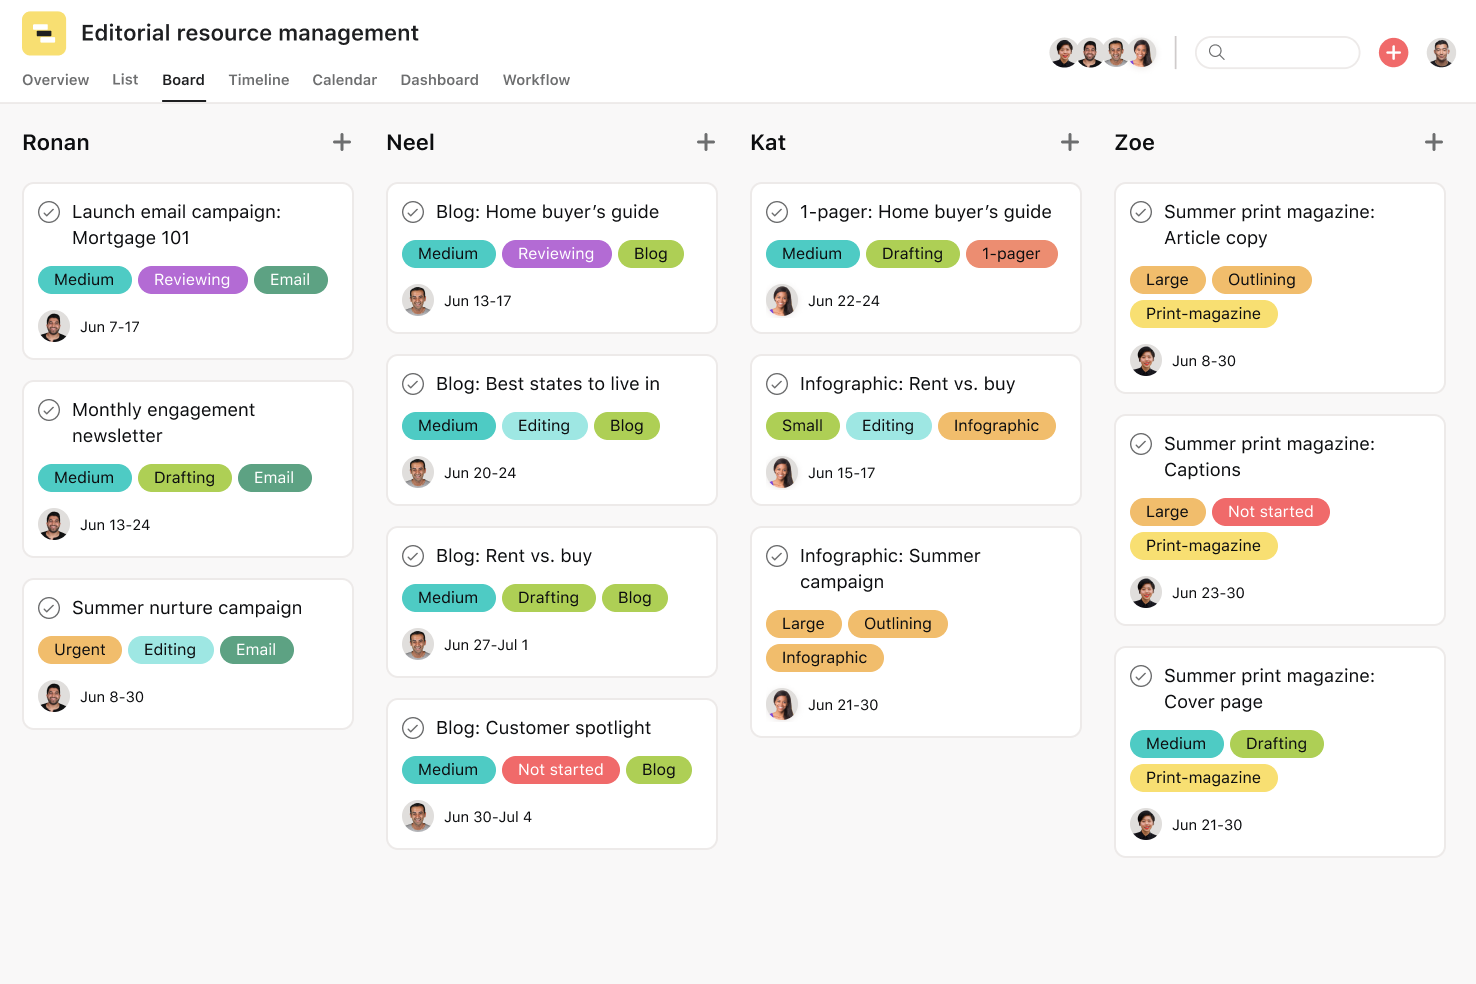 [Product ui] Editorial resource management (board)